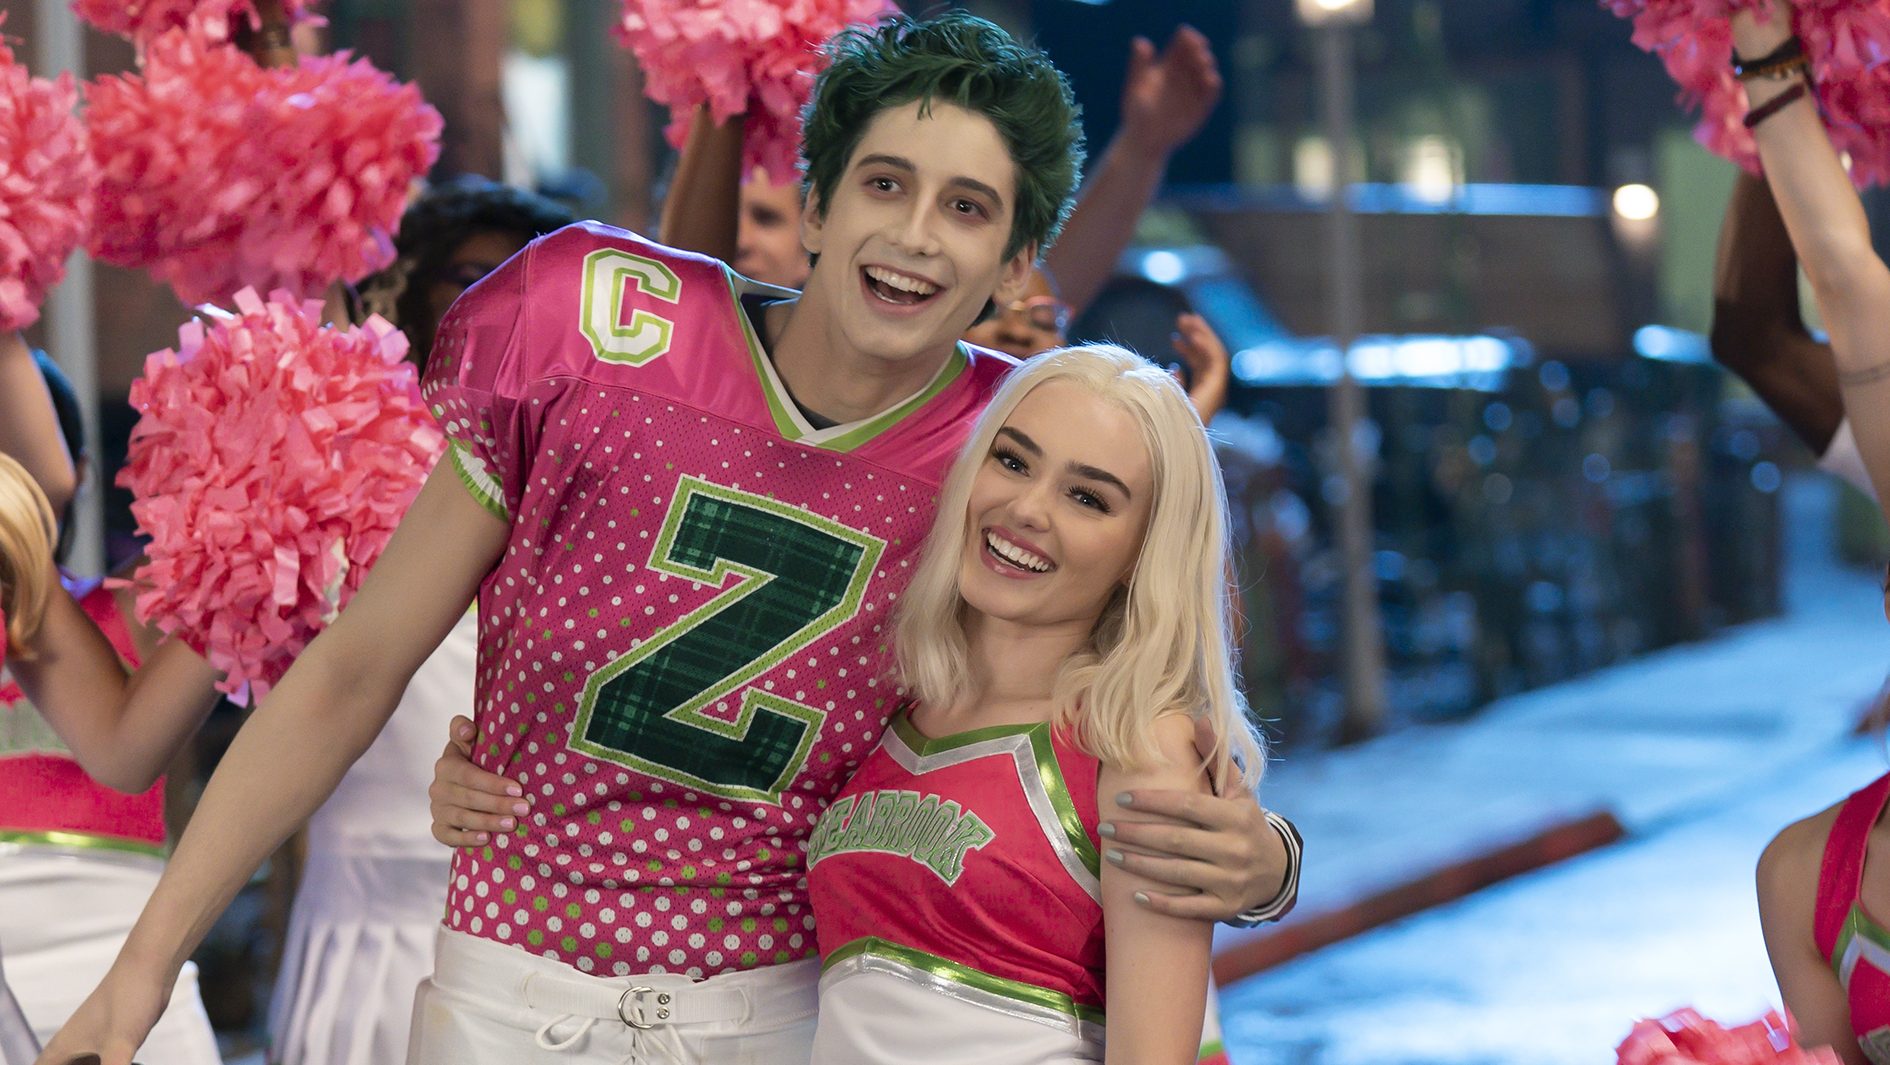 ZOMBIES 3 First Look (2022) With Meg Donnelly & Milo Manheim 